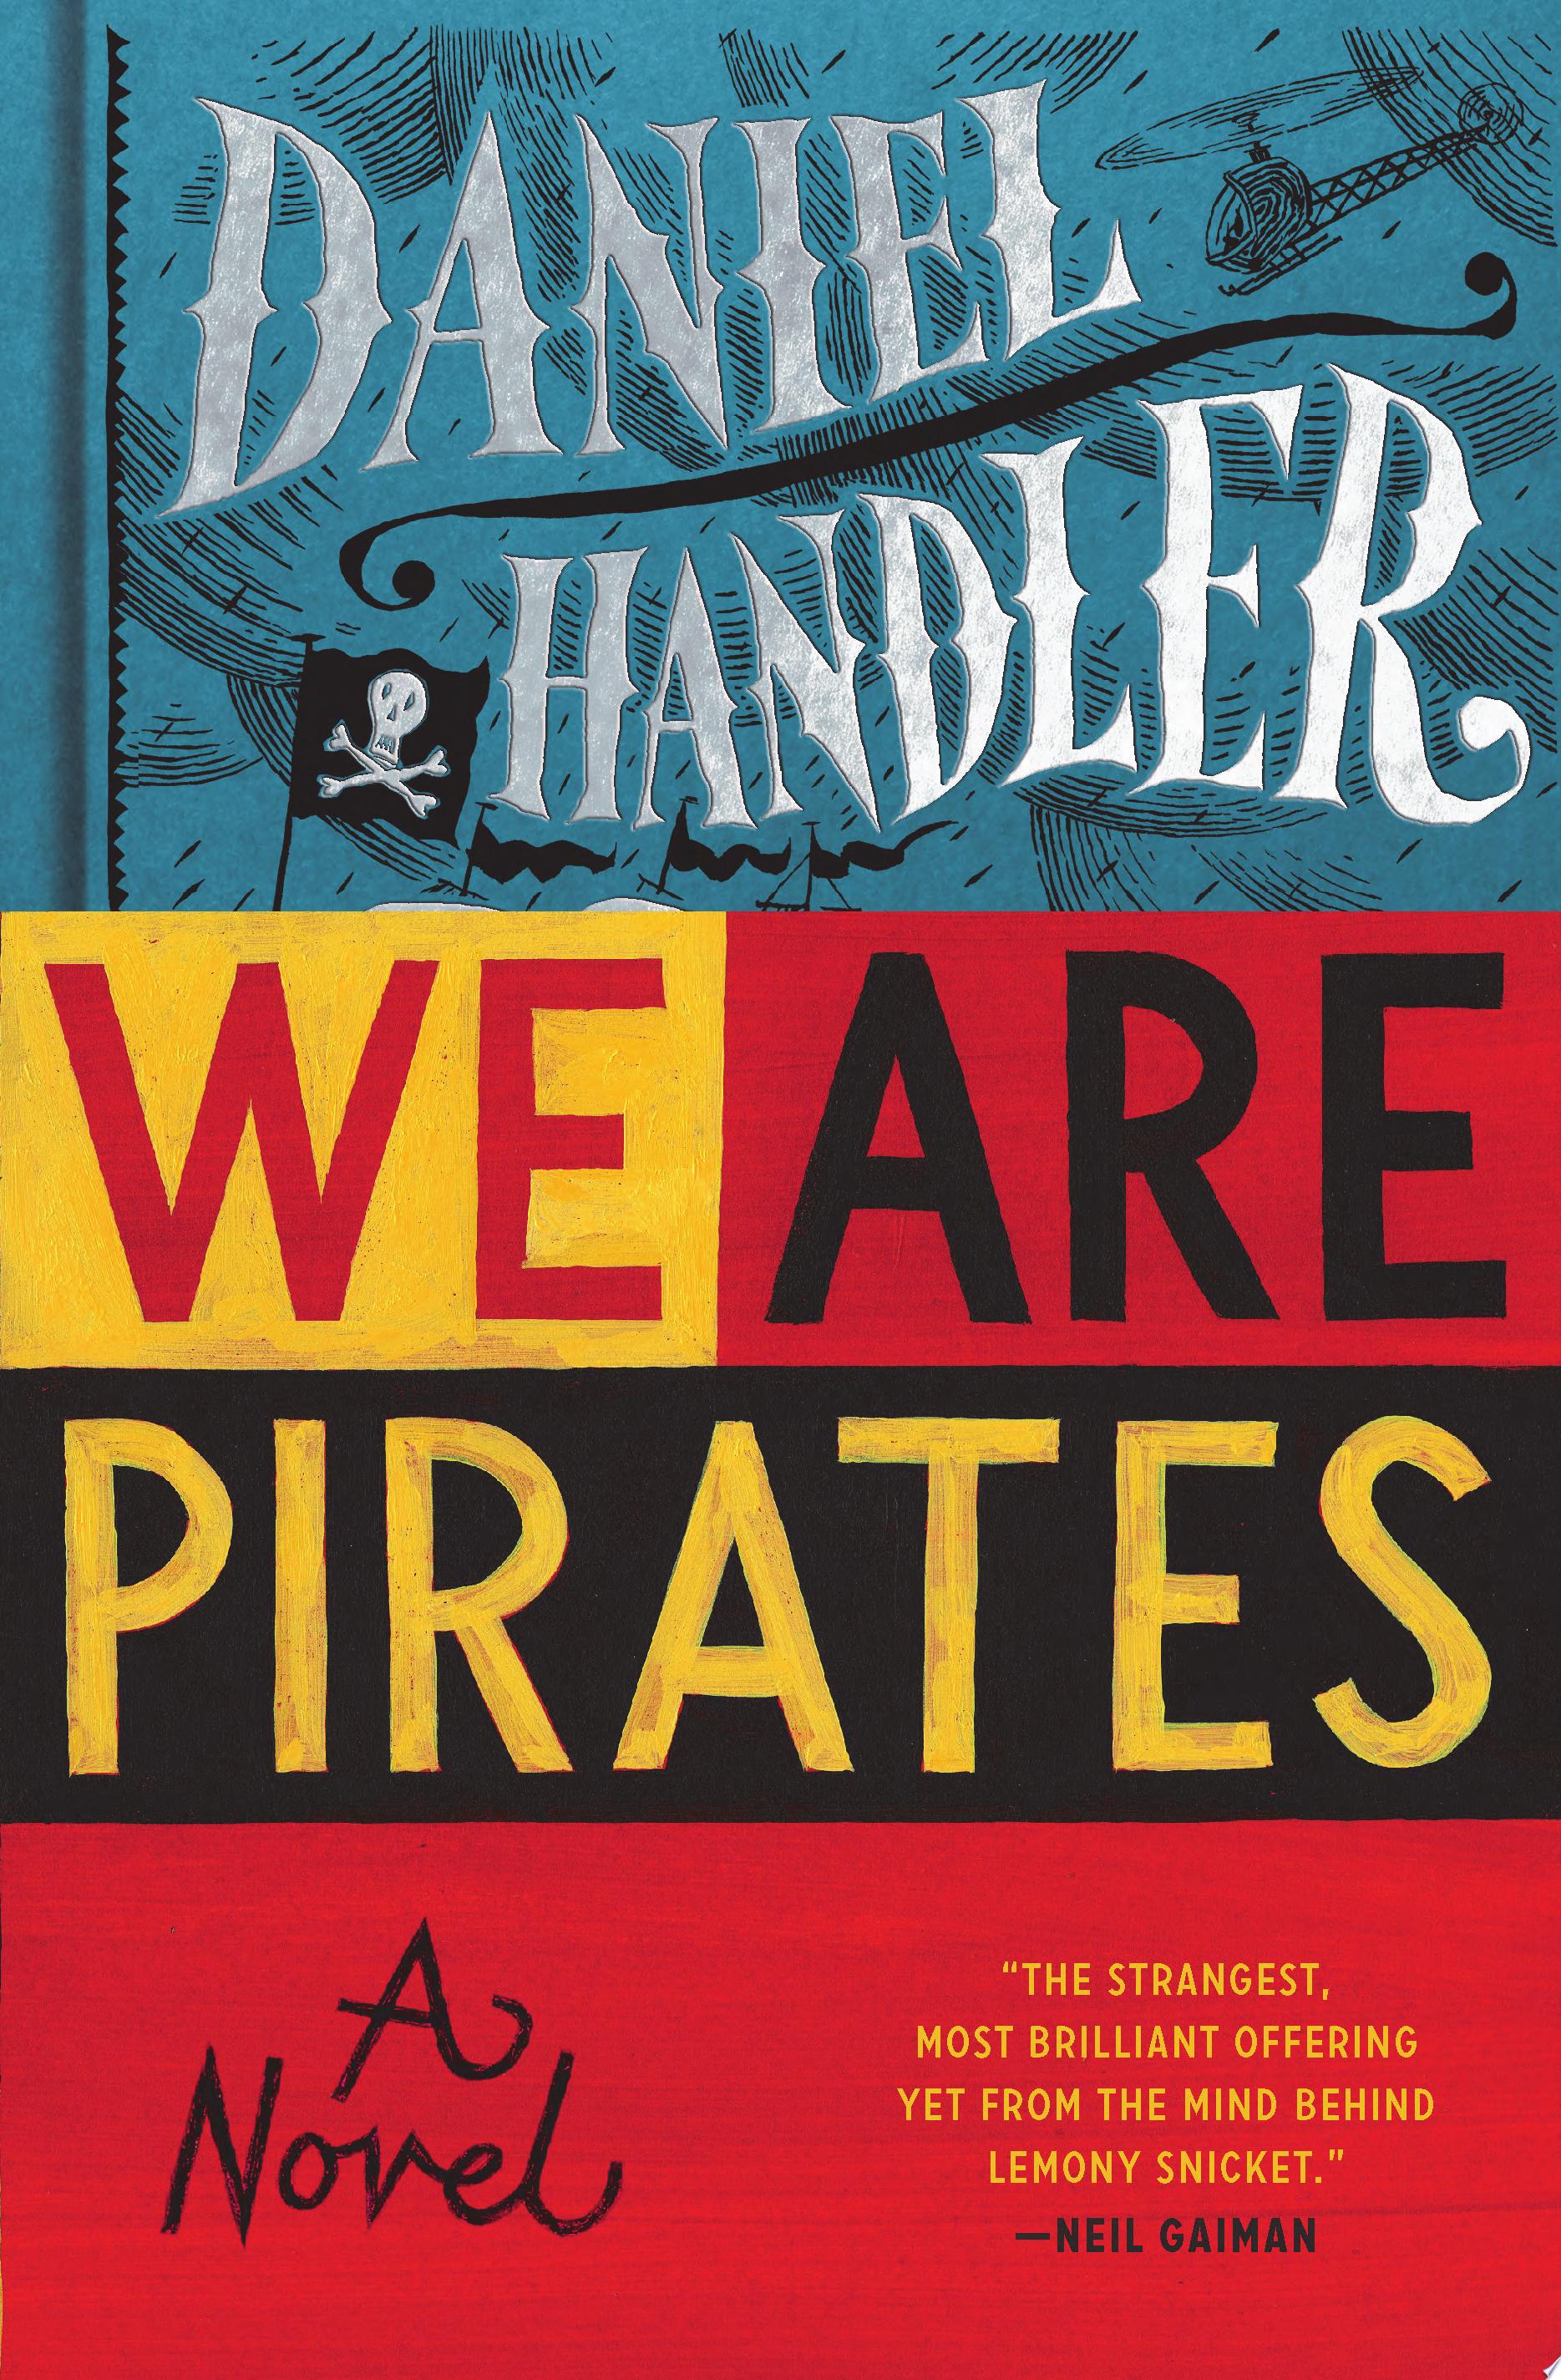 Image for "We Are Pirates"